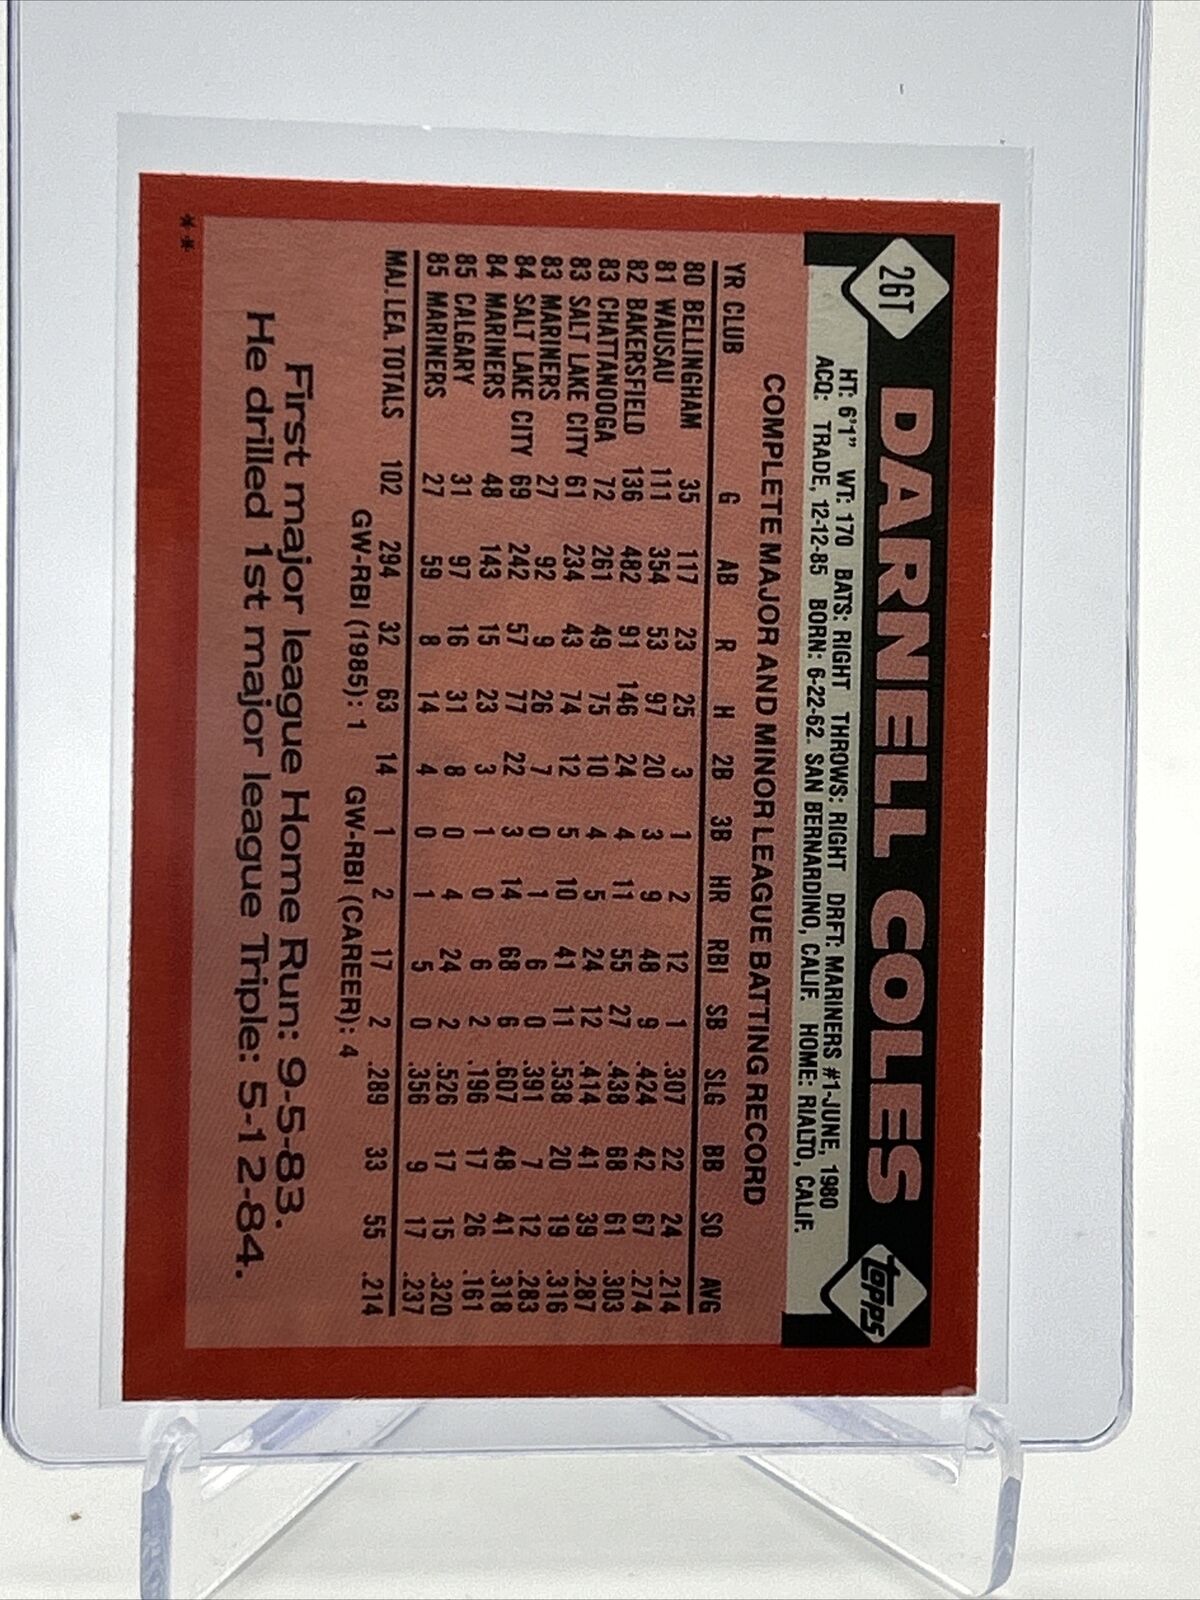 1986 Topps Traded Darnell Coles Baseball Card #26T NM-MT FREE SHIPPING